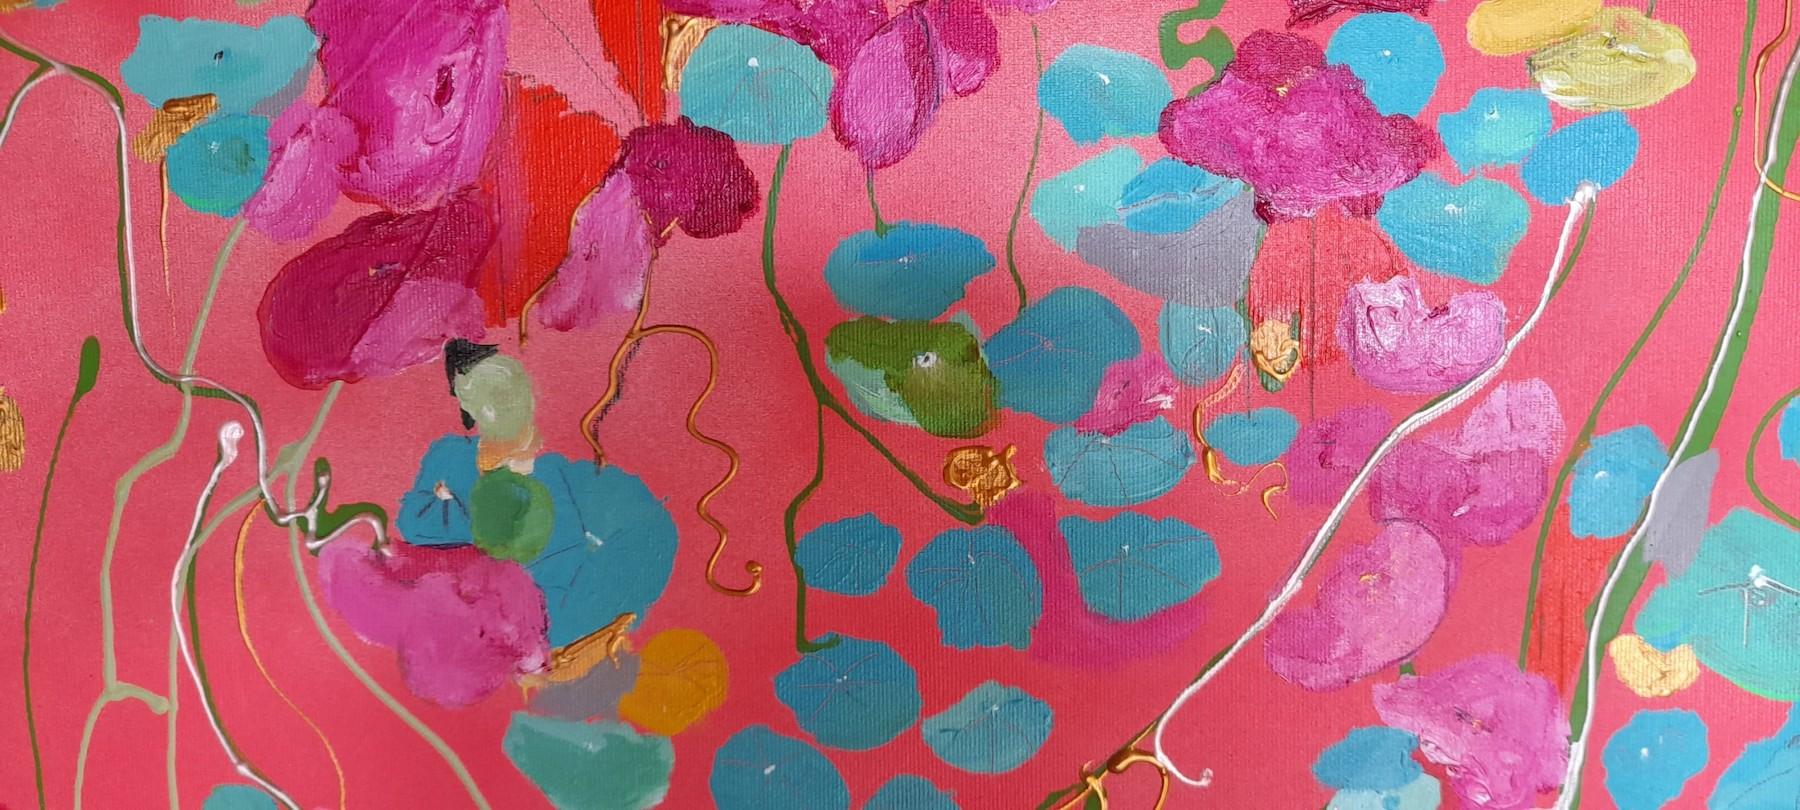 Strawberry & Teal Nasturtiums, Contemporary Monet Style Art, Floral Painting For Sale 3